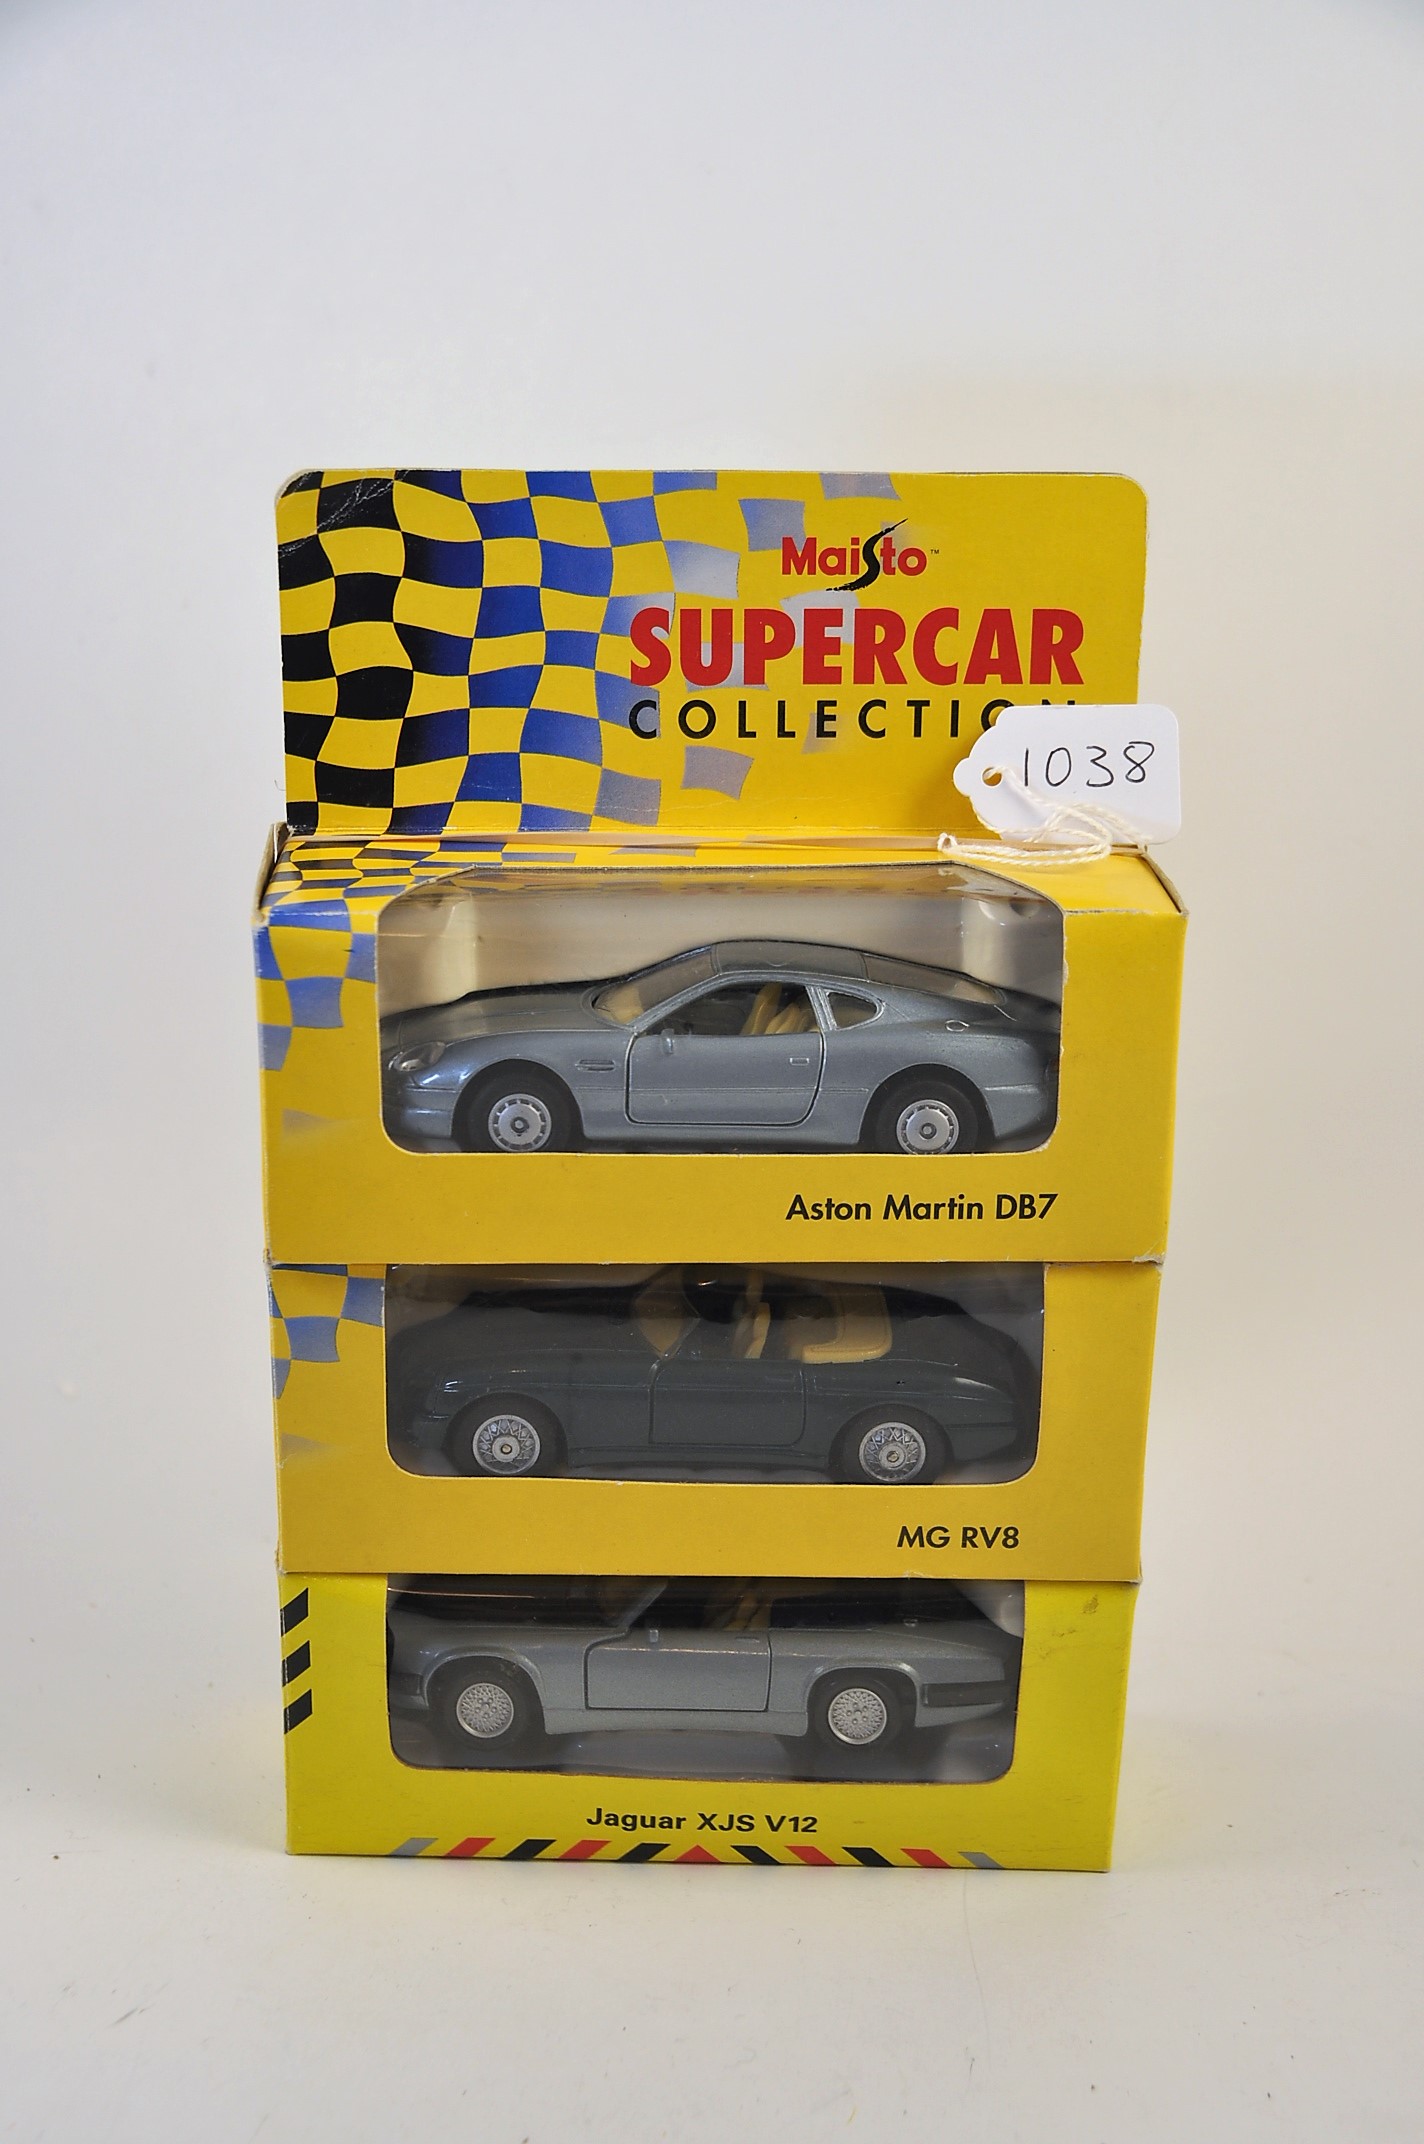 3 X MAISTO SUPERCAR COLLECTION ASTON MARTIN DB7, MG RV8, AND A JAGUAR XJS V12 ALL BOXED IN GC.